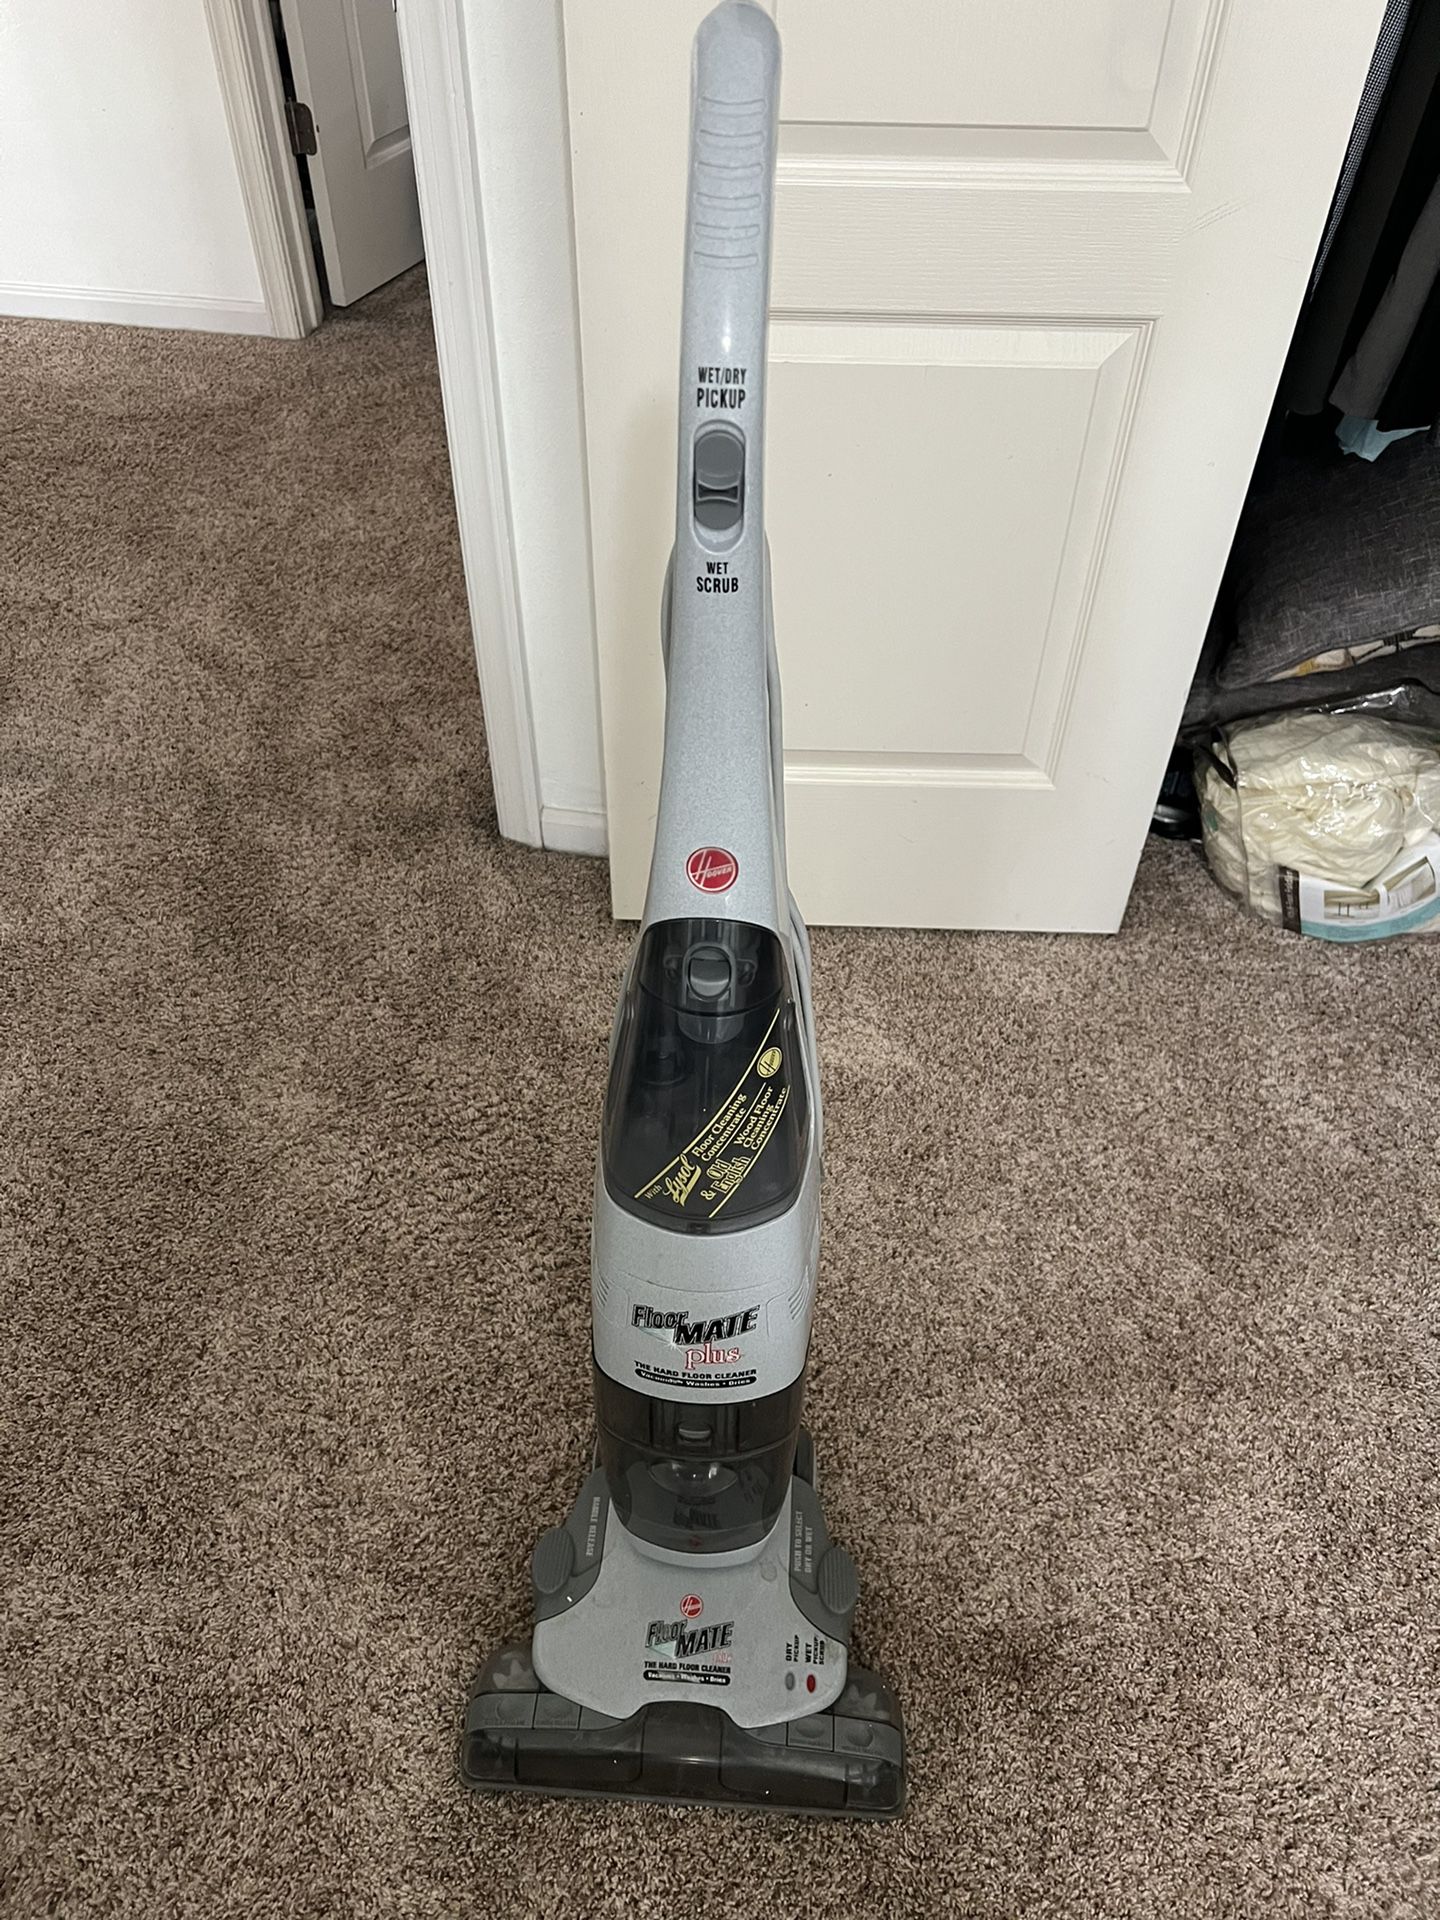 Hoover Floor Mate Plus, Hard Floor Cleaner  Vacuums, Scrubs, Washes And Dries